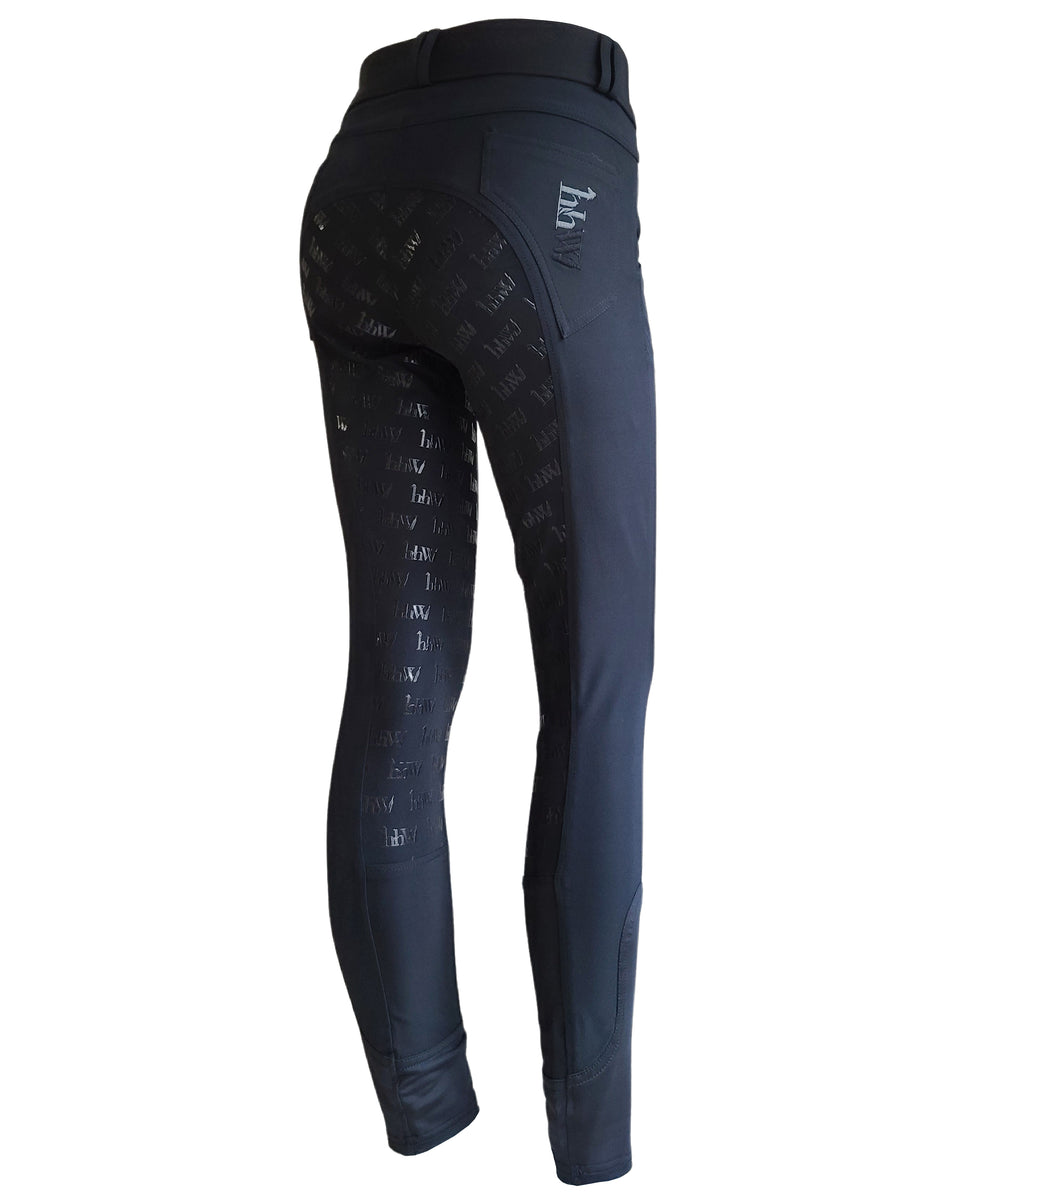 English Horse Riding Breeches hhW Full Seat Silicone Lightweight Front and Back Pockets Zip with Slide Closure Belt Loops Sock Bottom Schooling Jumping 3-Day Eventing Trail Riding Comfort Quality Unique Style Black Boutique 